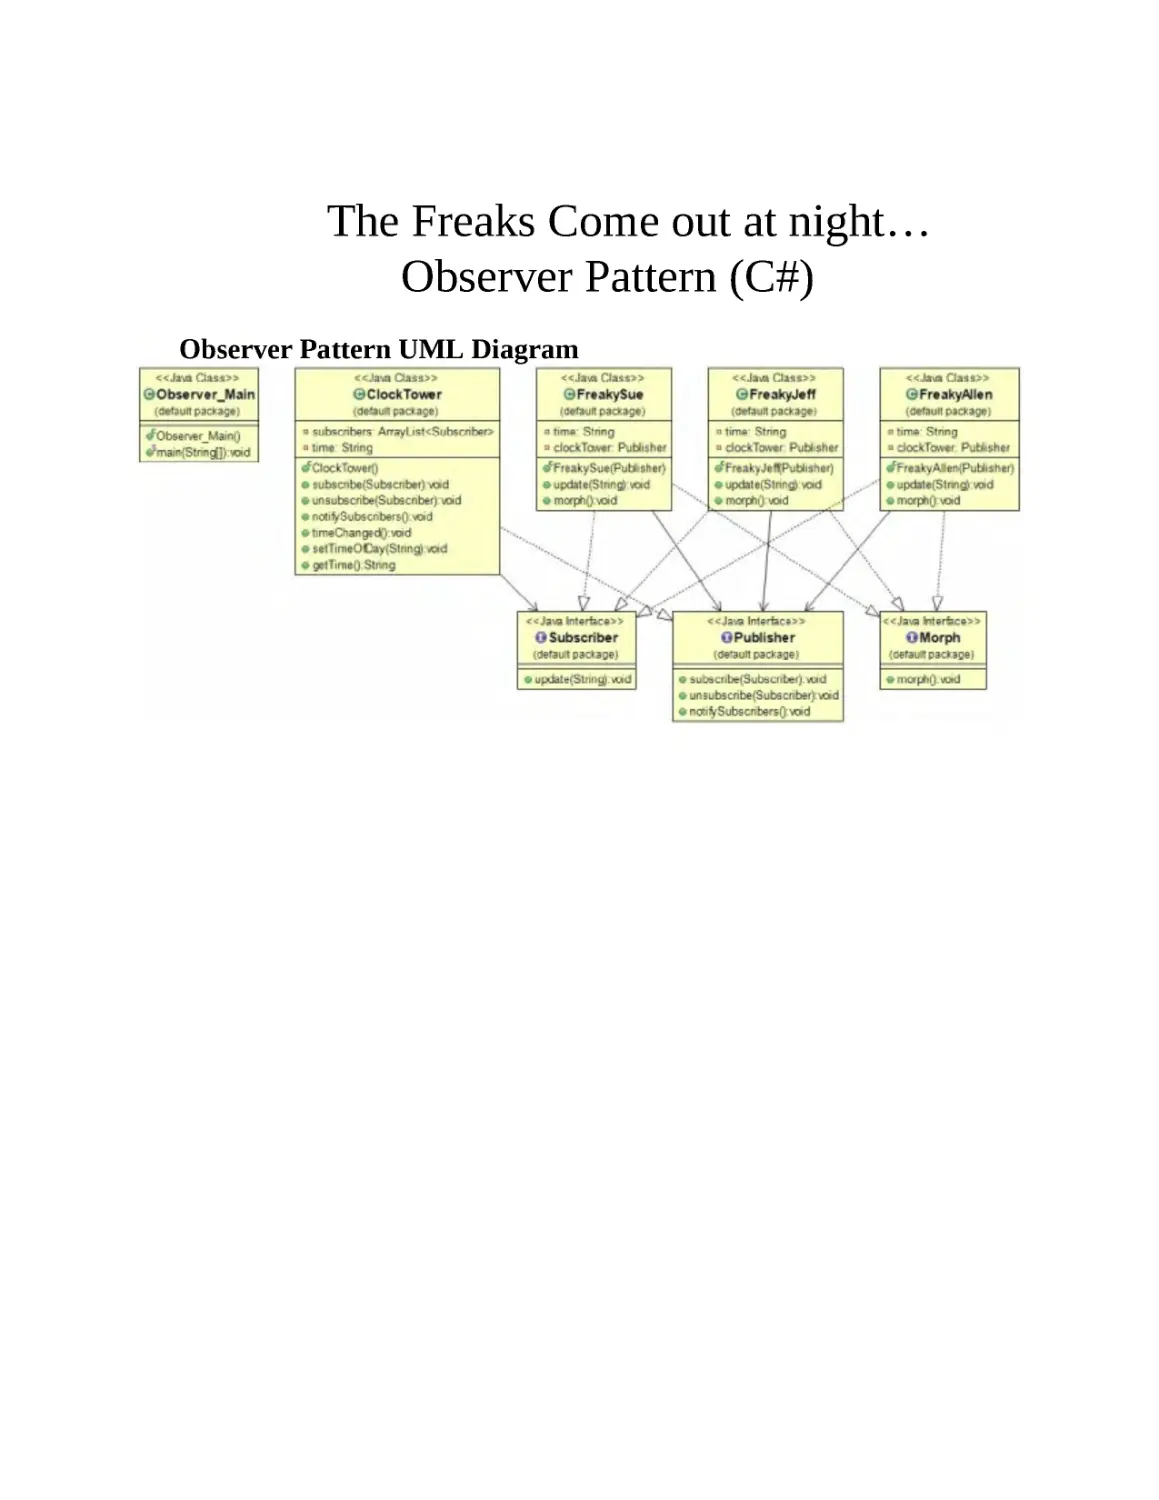 ﻿The Freaks Come out at night… Observer Pattern øC#